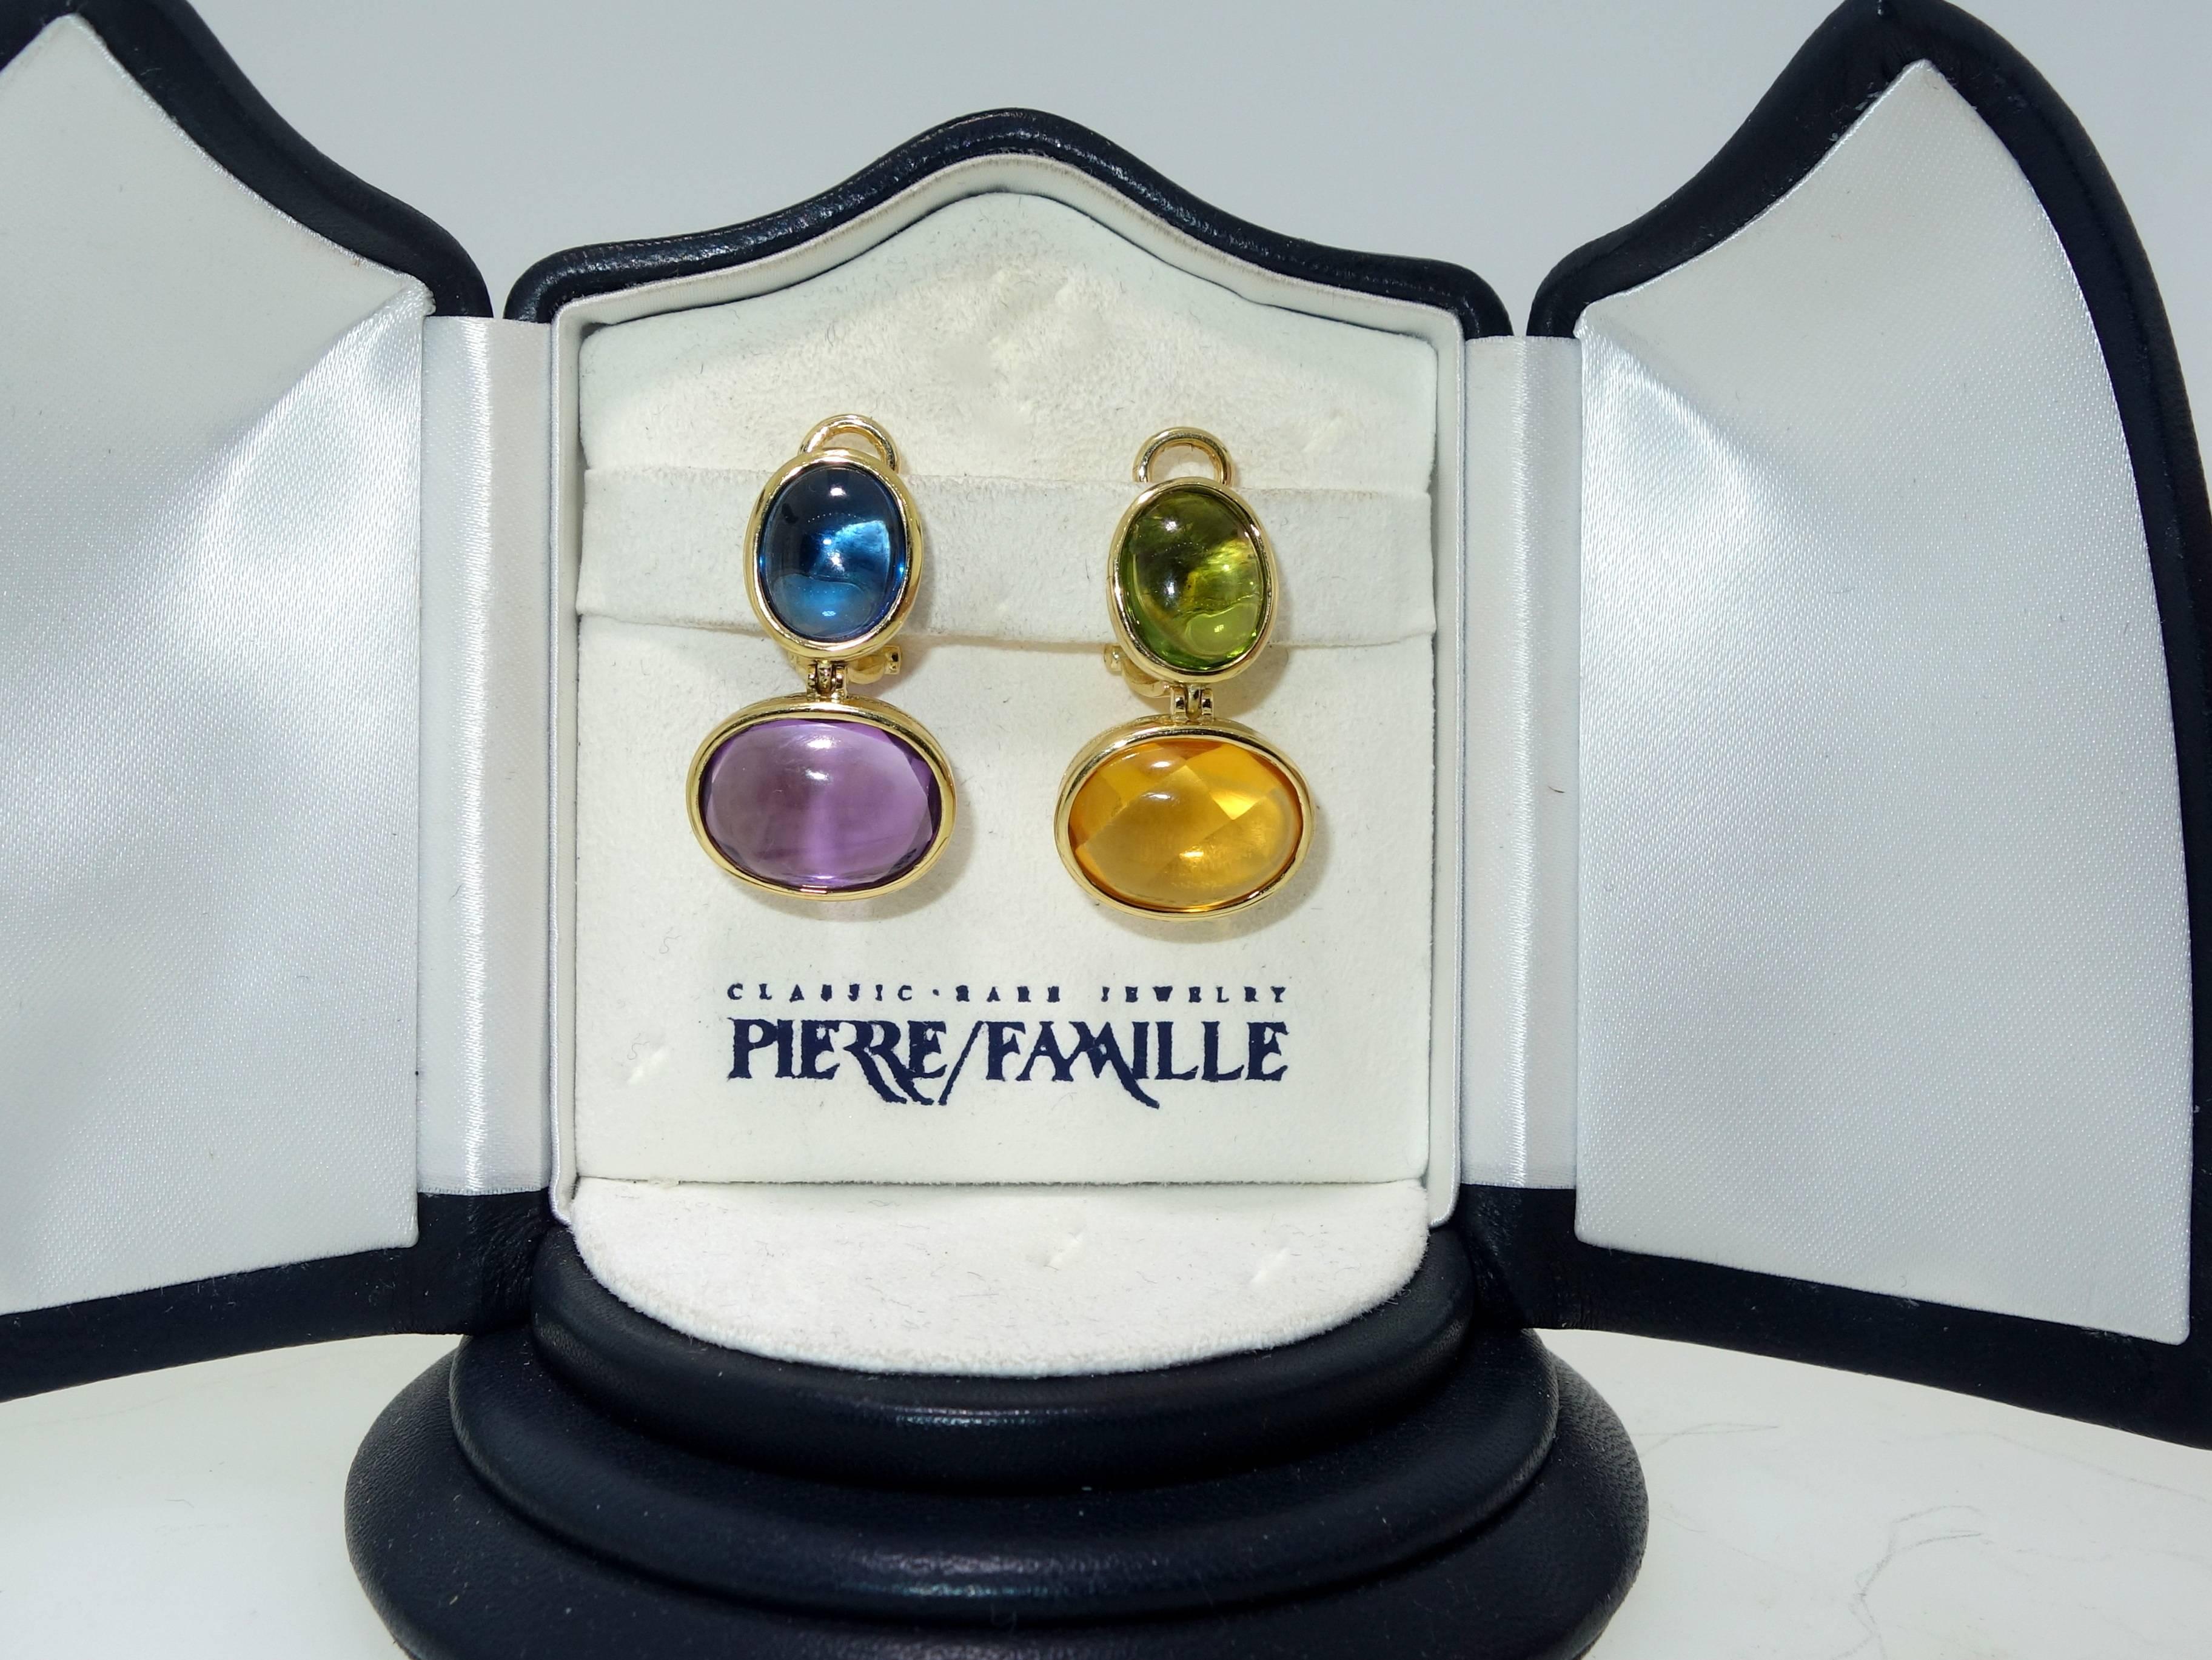 18K yellow gold possessing four different bezel set cabachon cut stones: Amethyst, citrine, peridot and blue topaz.  These colorful  earrings are 1.25 inches long. 17 grams in weight.  These earrings can be worn either pierced or non pierced and we